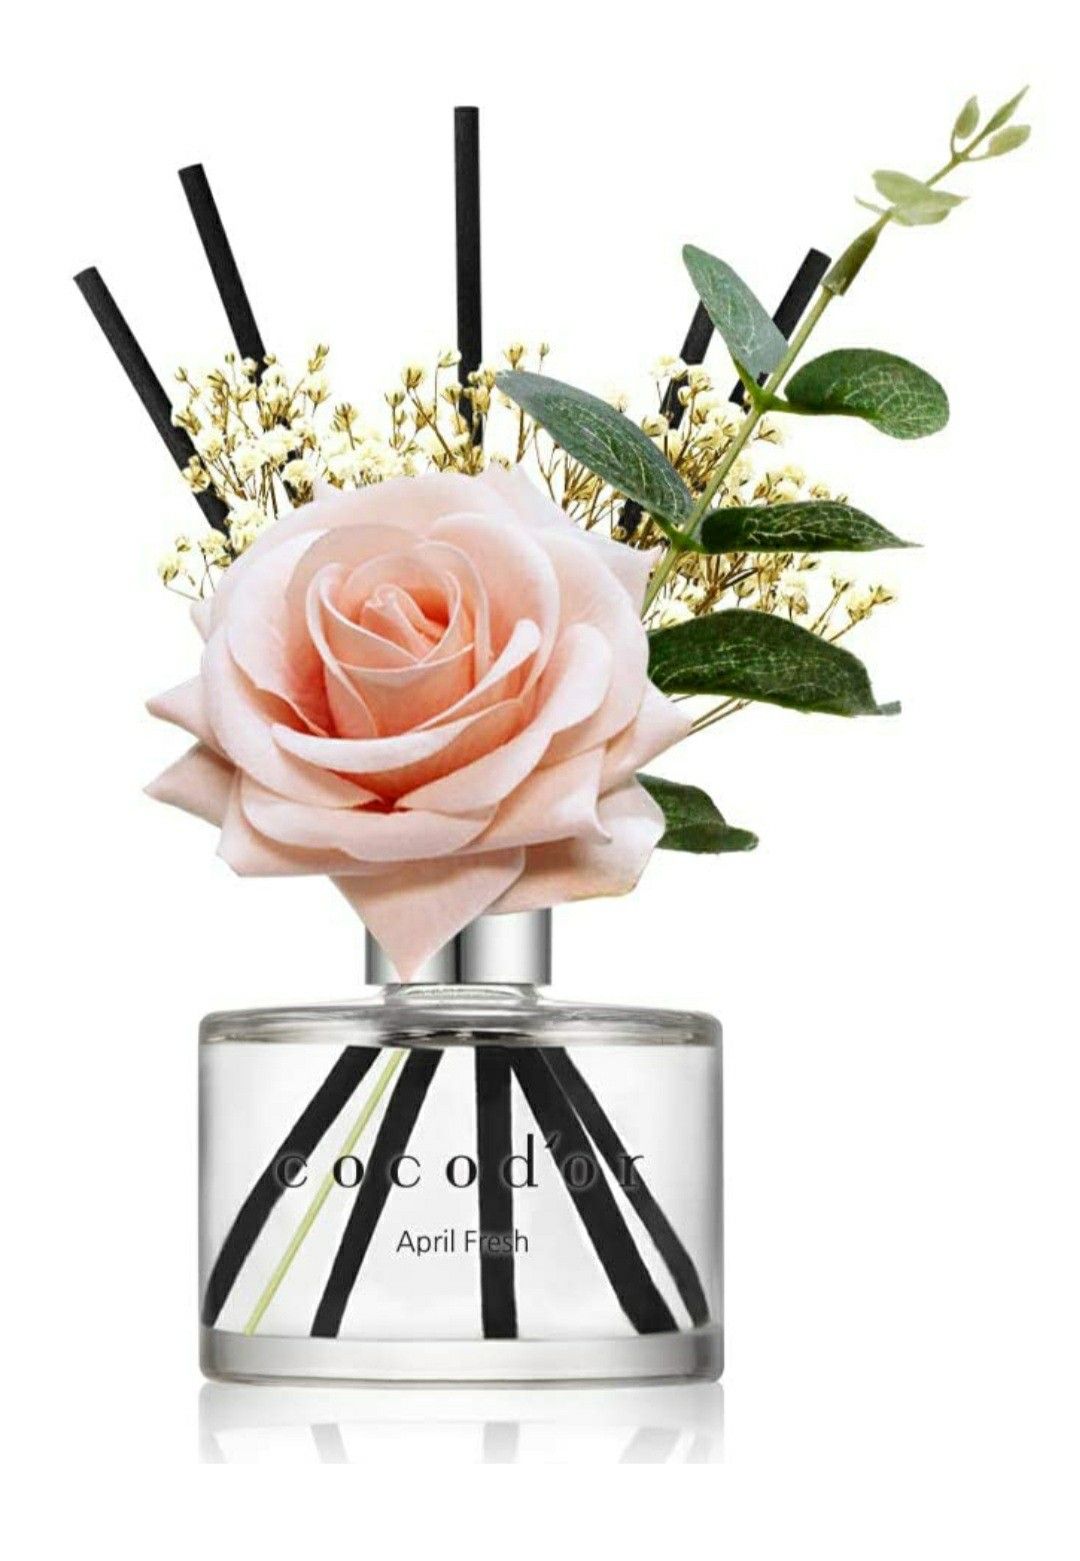 Cocod'or Rose Flower April Breeze Reed Diffuser Set, Home Decor & Office Decor, Fragrance and Mother's Day, Birthday, Wedding Gifts, 6.7oz